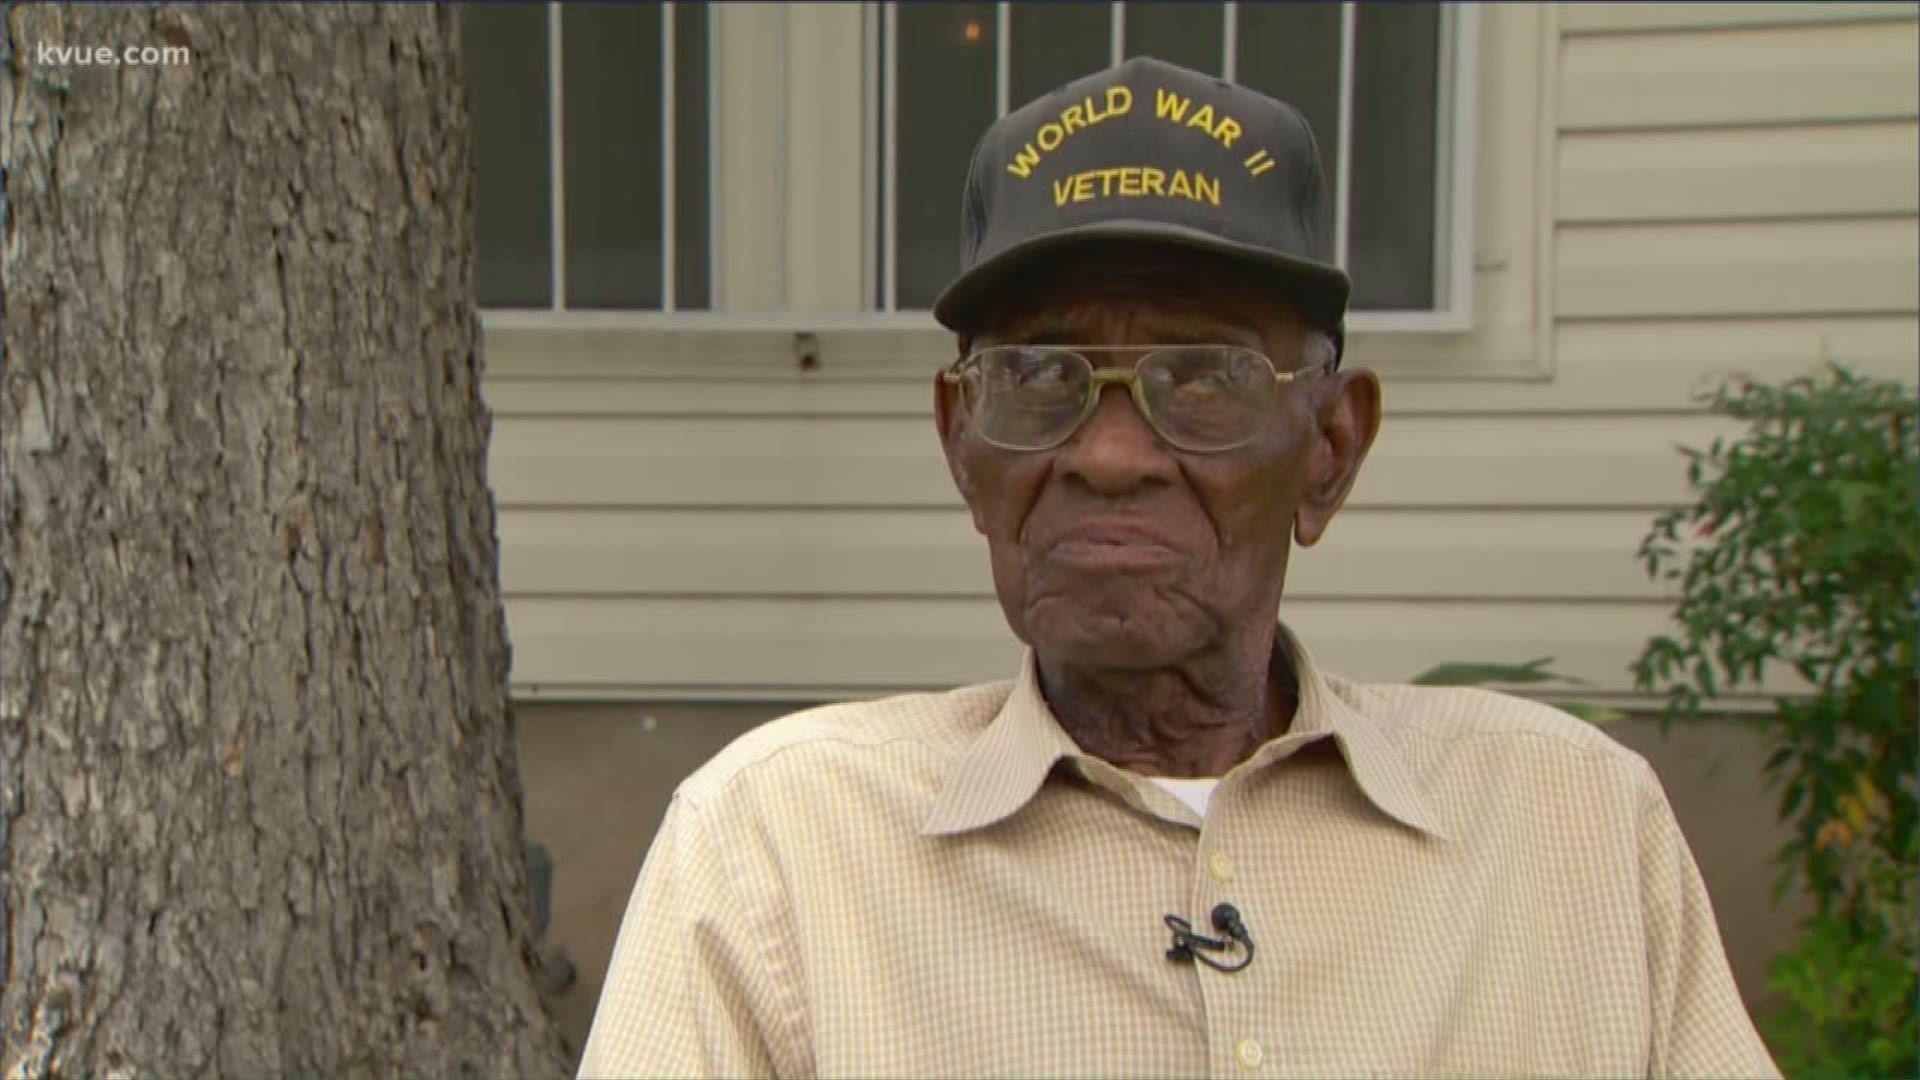 Overton was America's oldest World War II veteran at the time of his death in December 2018.